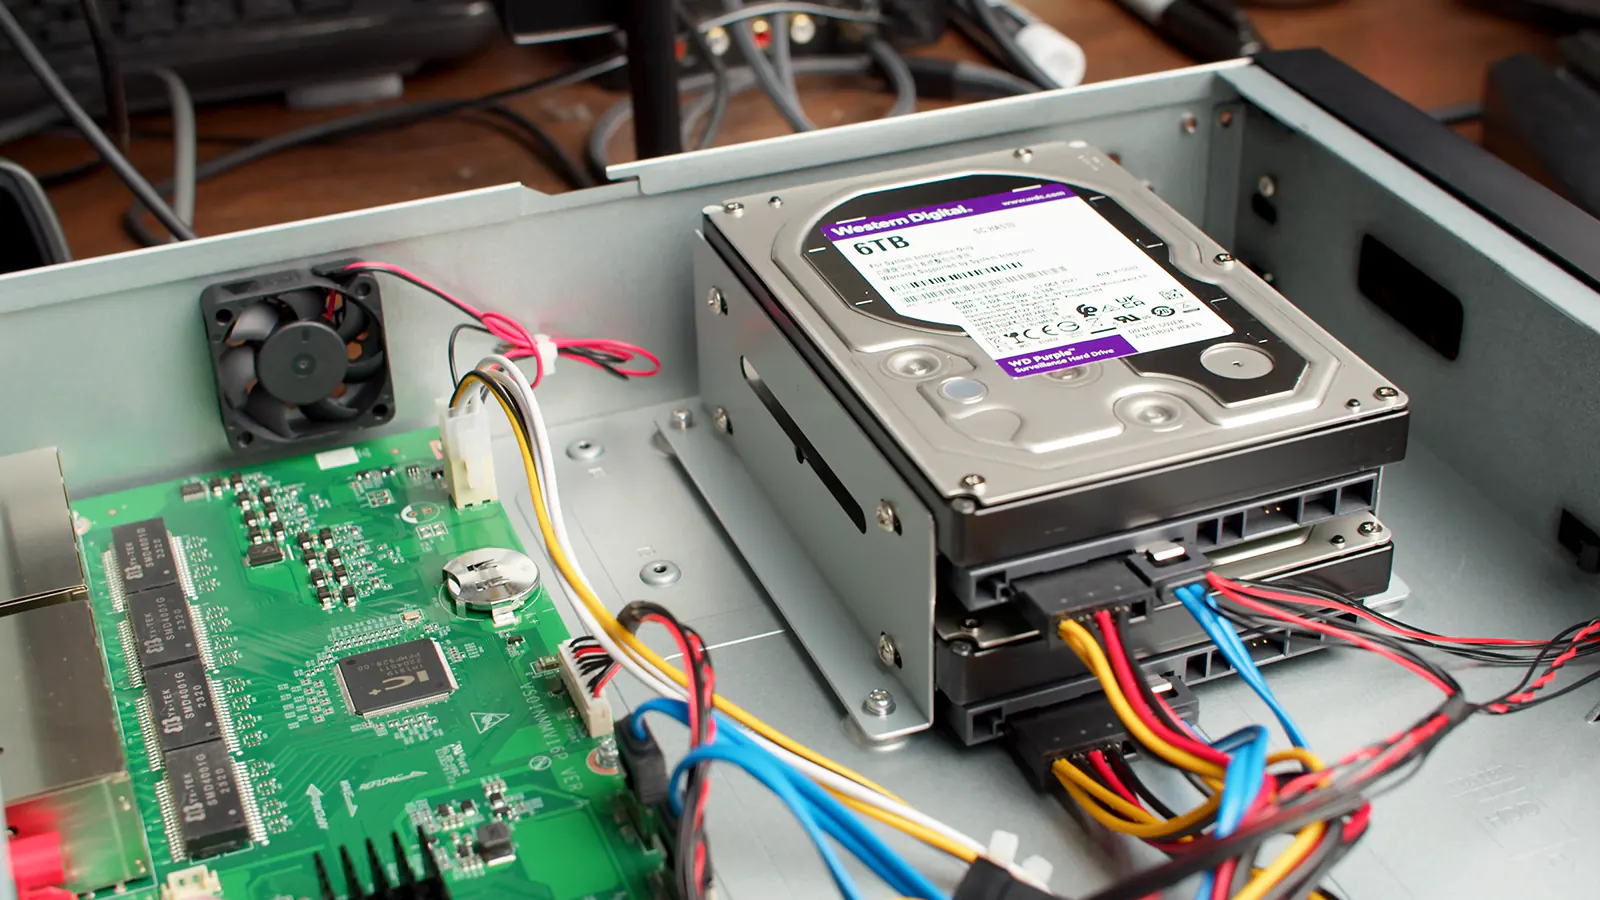 Two Western Digital 6TB Purple HDDs installed in an NVR, with SATA and power cables plugged into each drive.